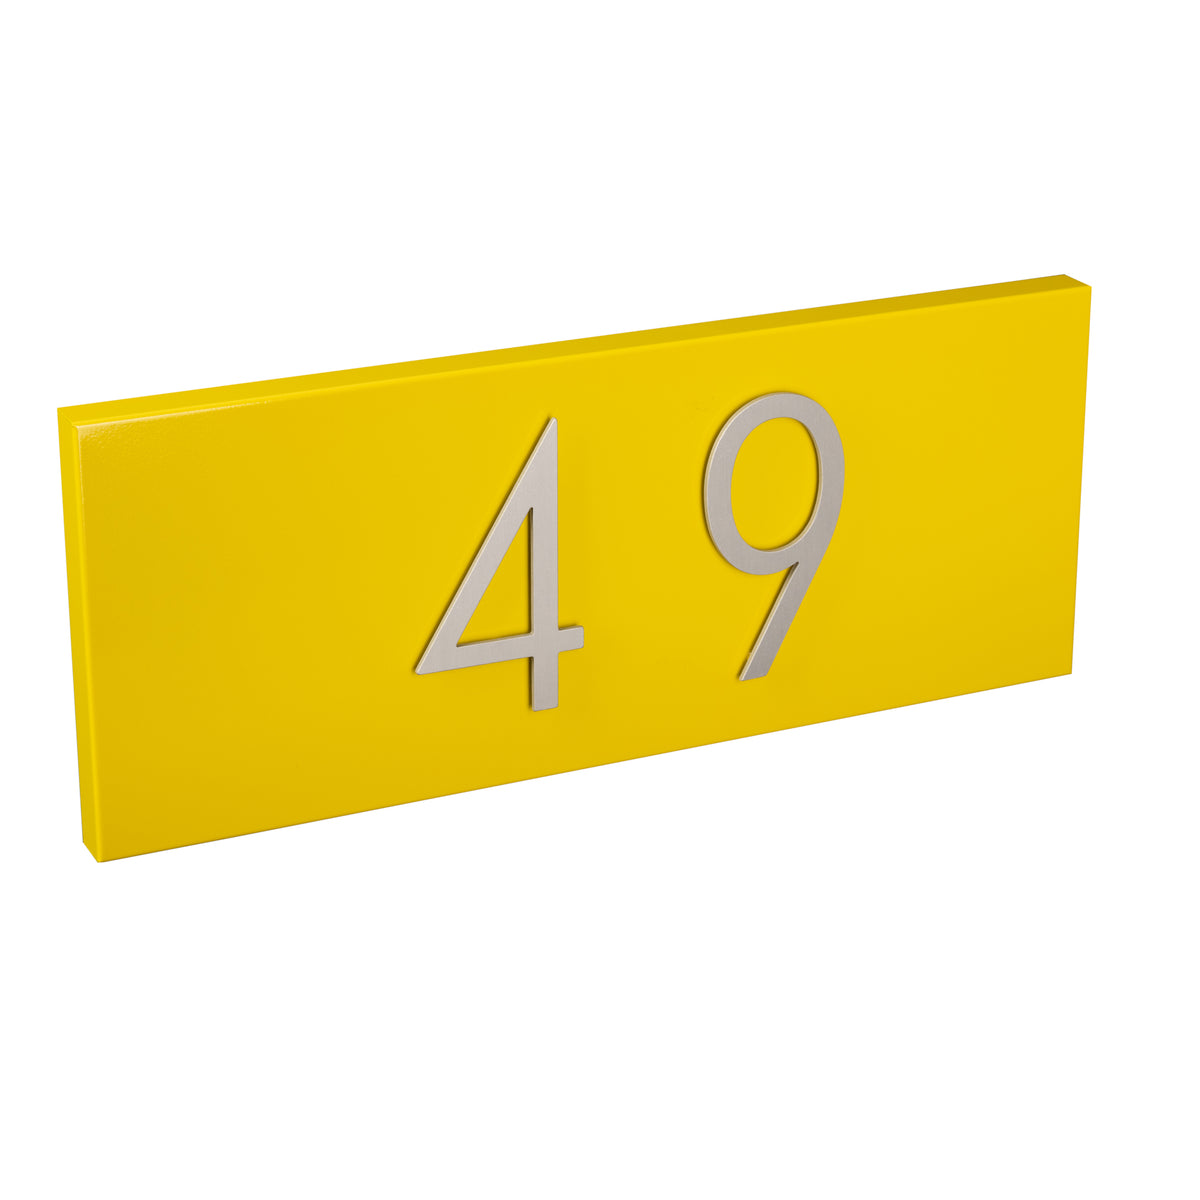 sunflower address plaque with silver numbers